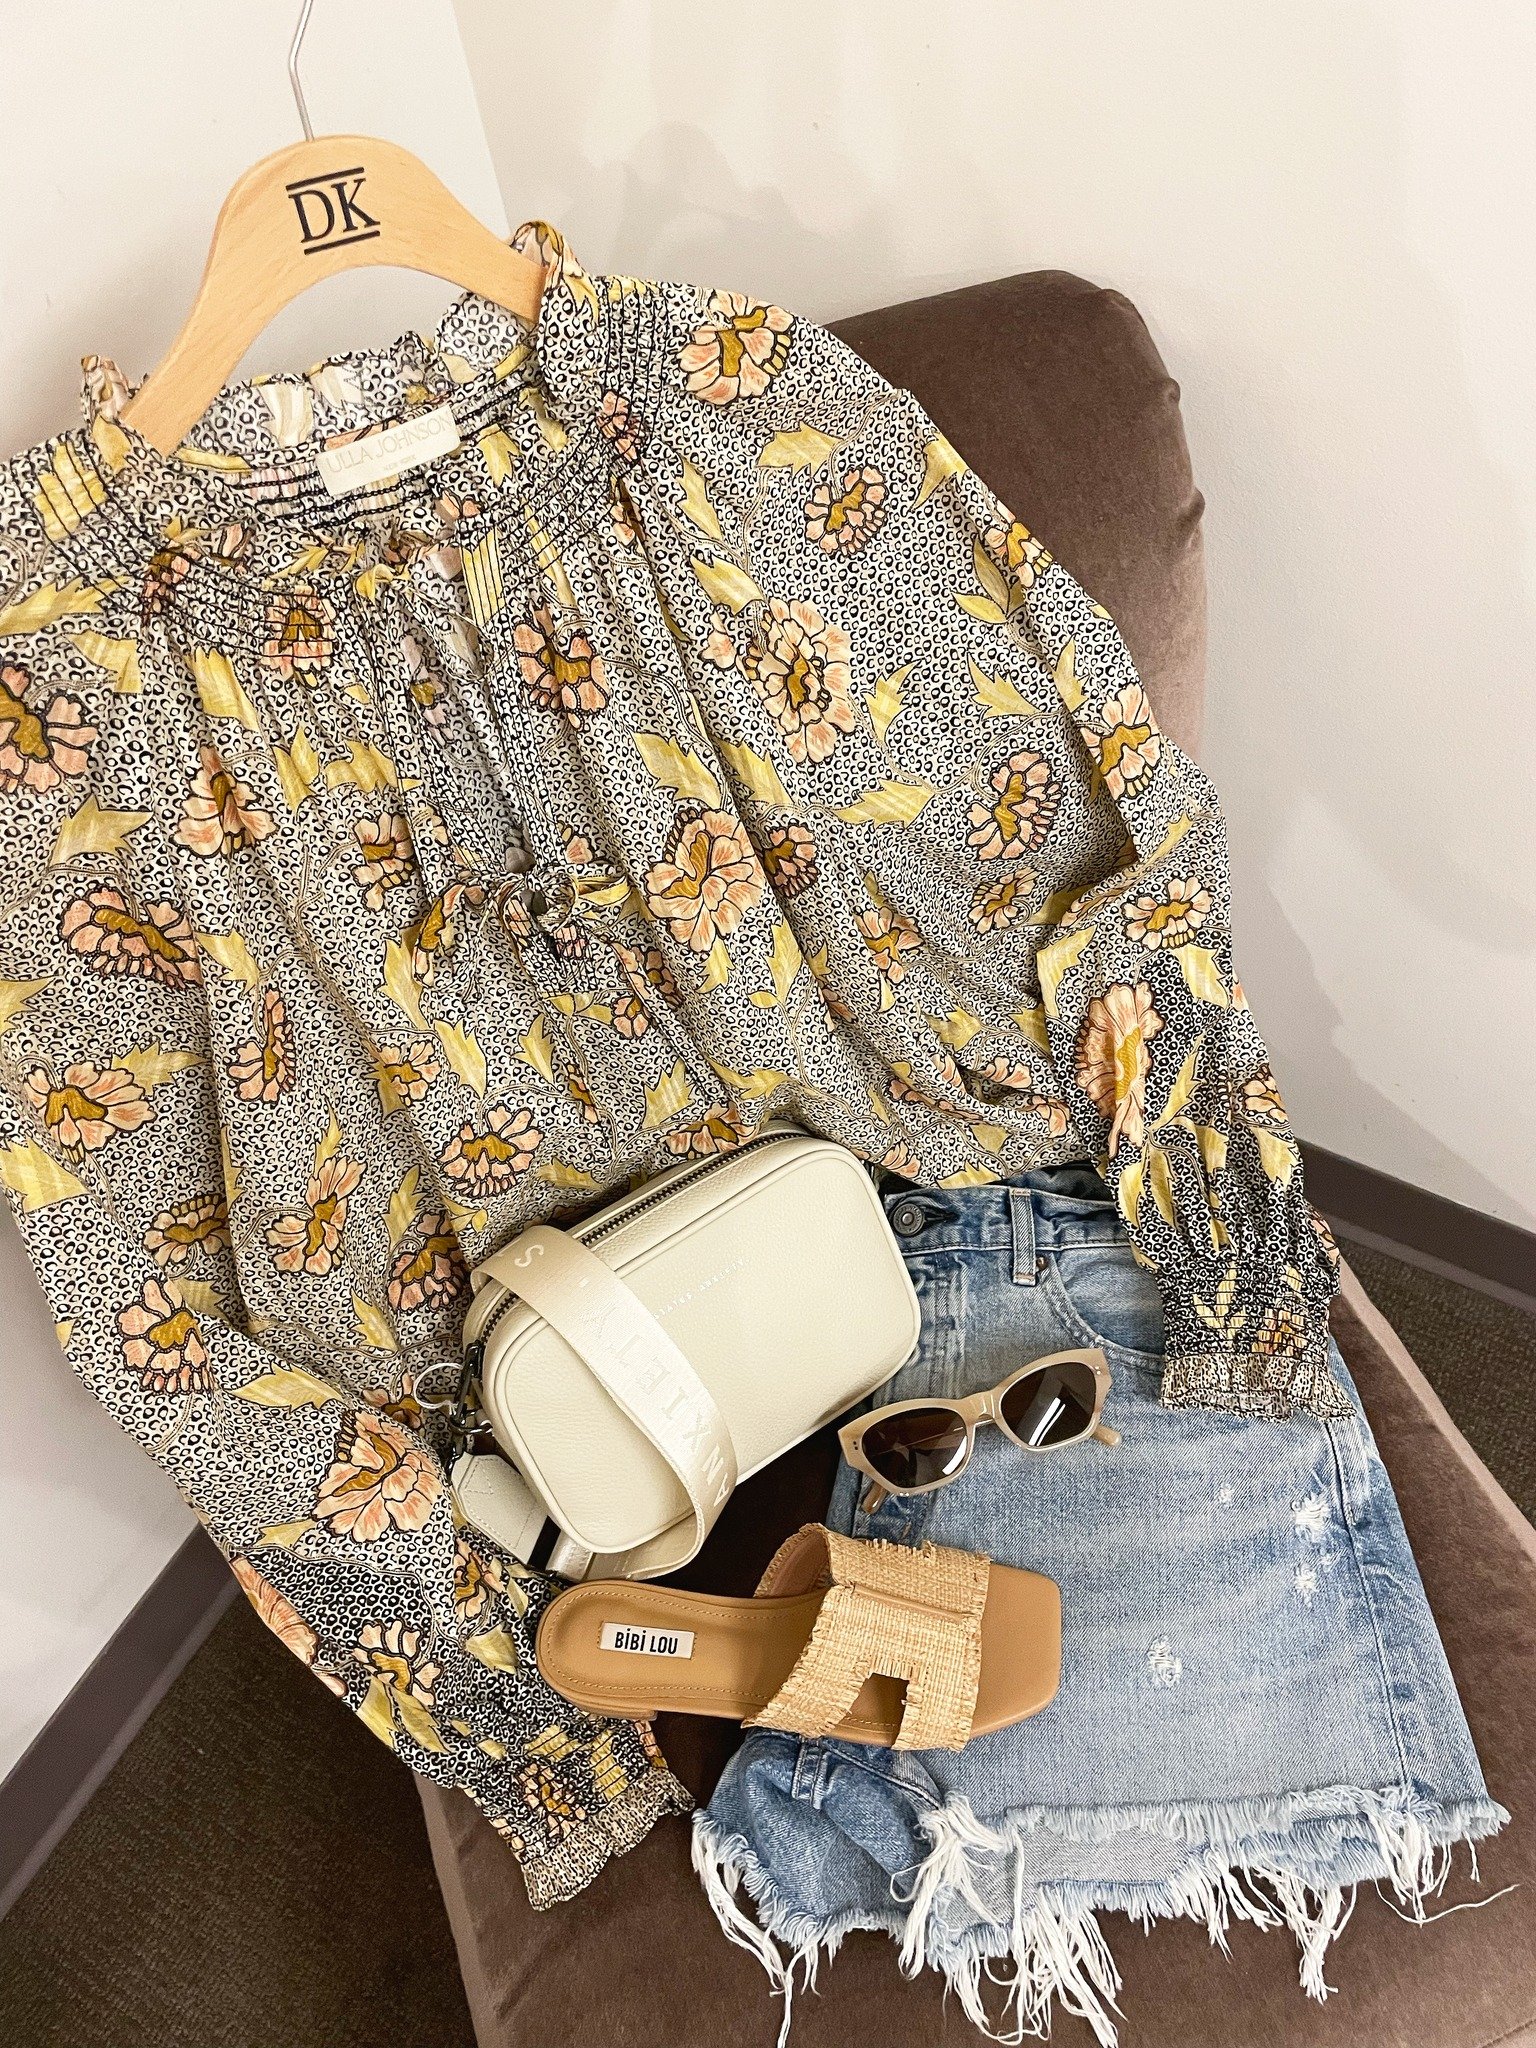 In bloom 💐 
Spring favorites from Ulla Johnson, Moussy Vintage, Bibi Lou Shoes &amp; Status Anxiety Accessories 🤍 Shop the look now at the link in our bio! 

#deborahkents #southtampa #springootd #ullajohnson #moussy #bibilou #statusanxiety #casual